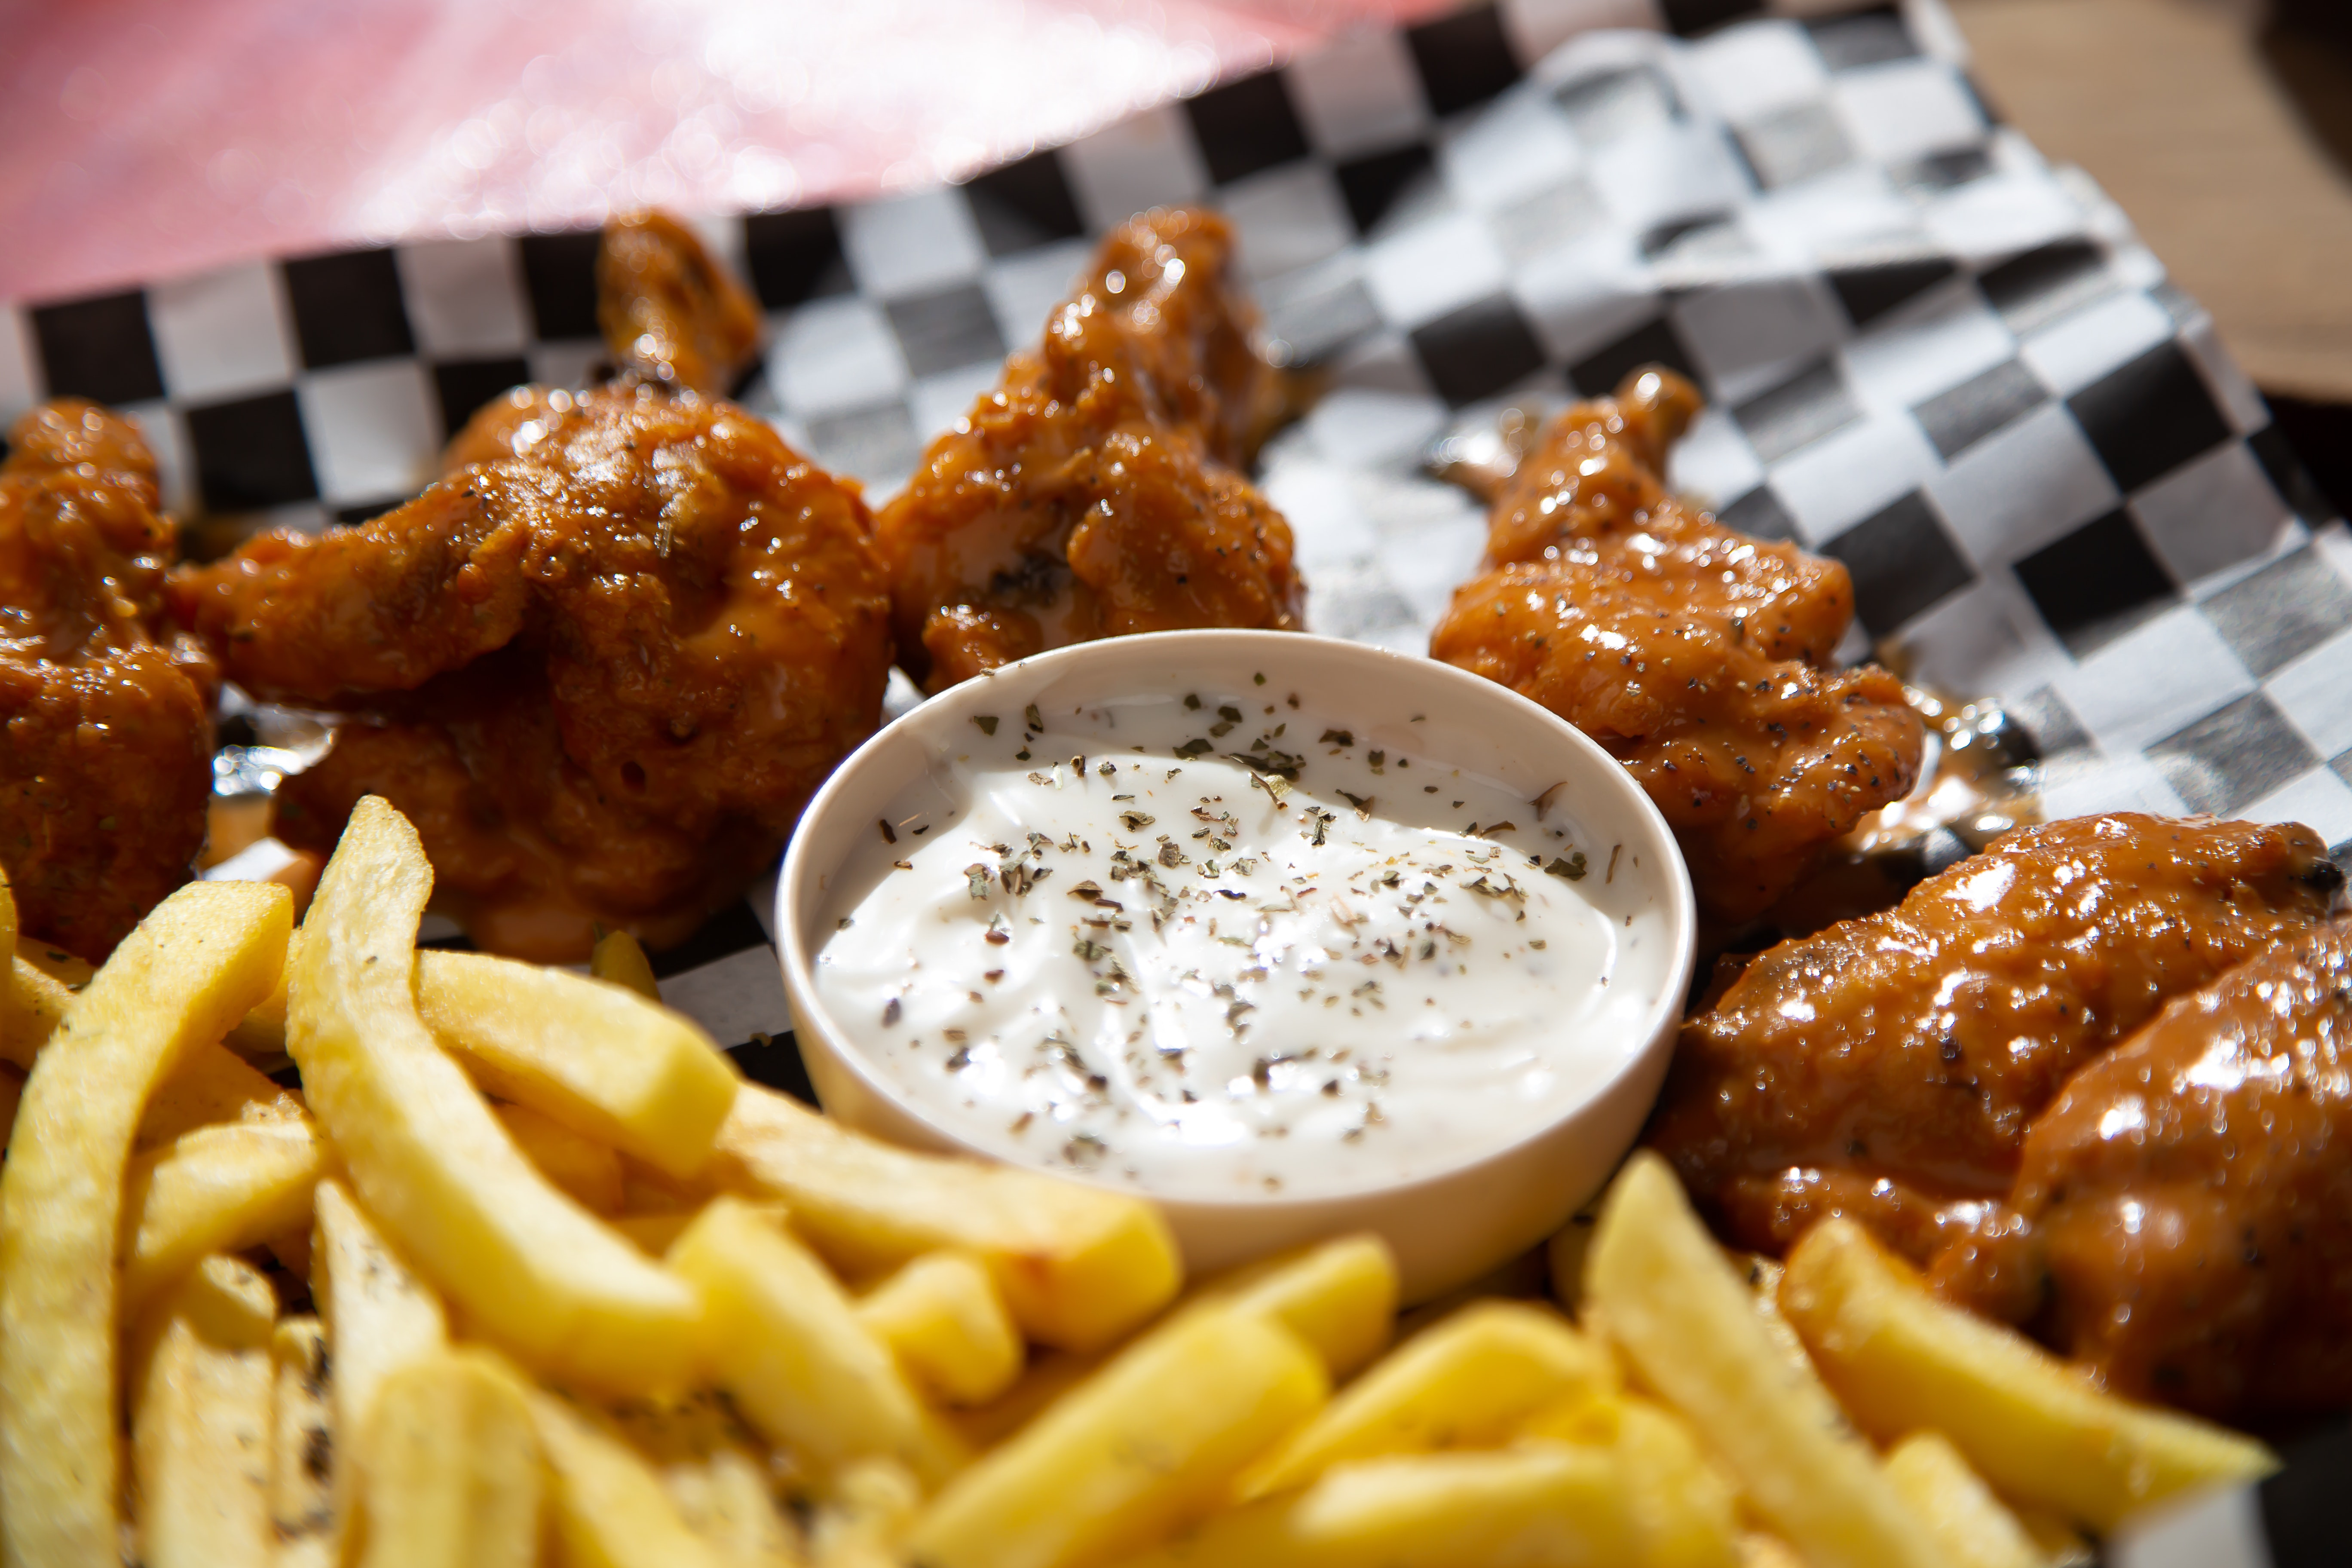 Price Reduced: Successful Wing Franchise 